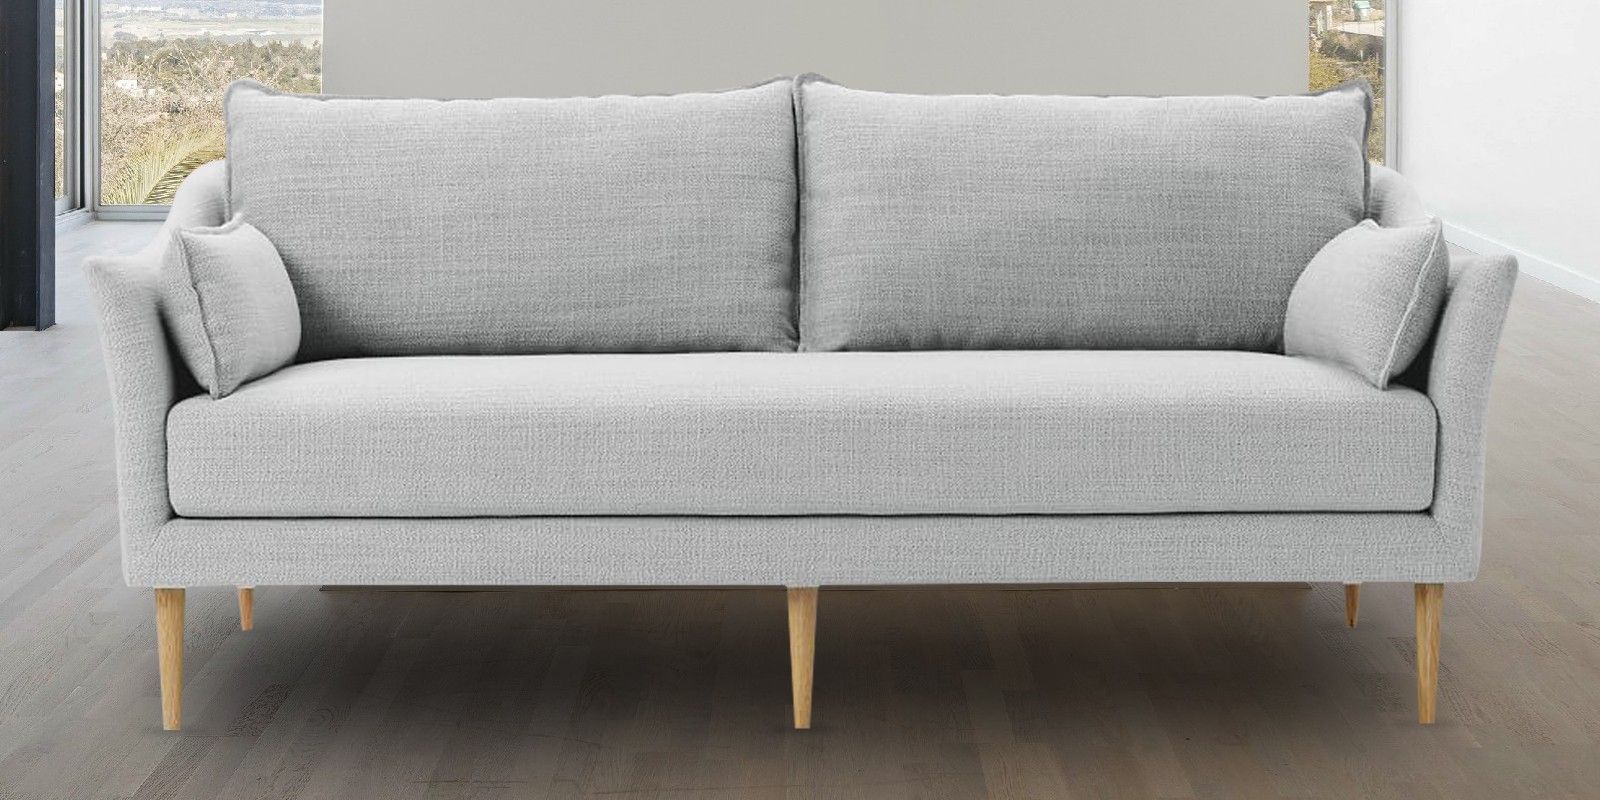 Soothe Fabric 3 Seater Sofa In Light Grey Colour – Dreamzz Furniture Regarding Sofas In Light Grey (View 10 of 20)